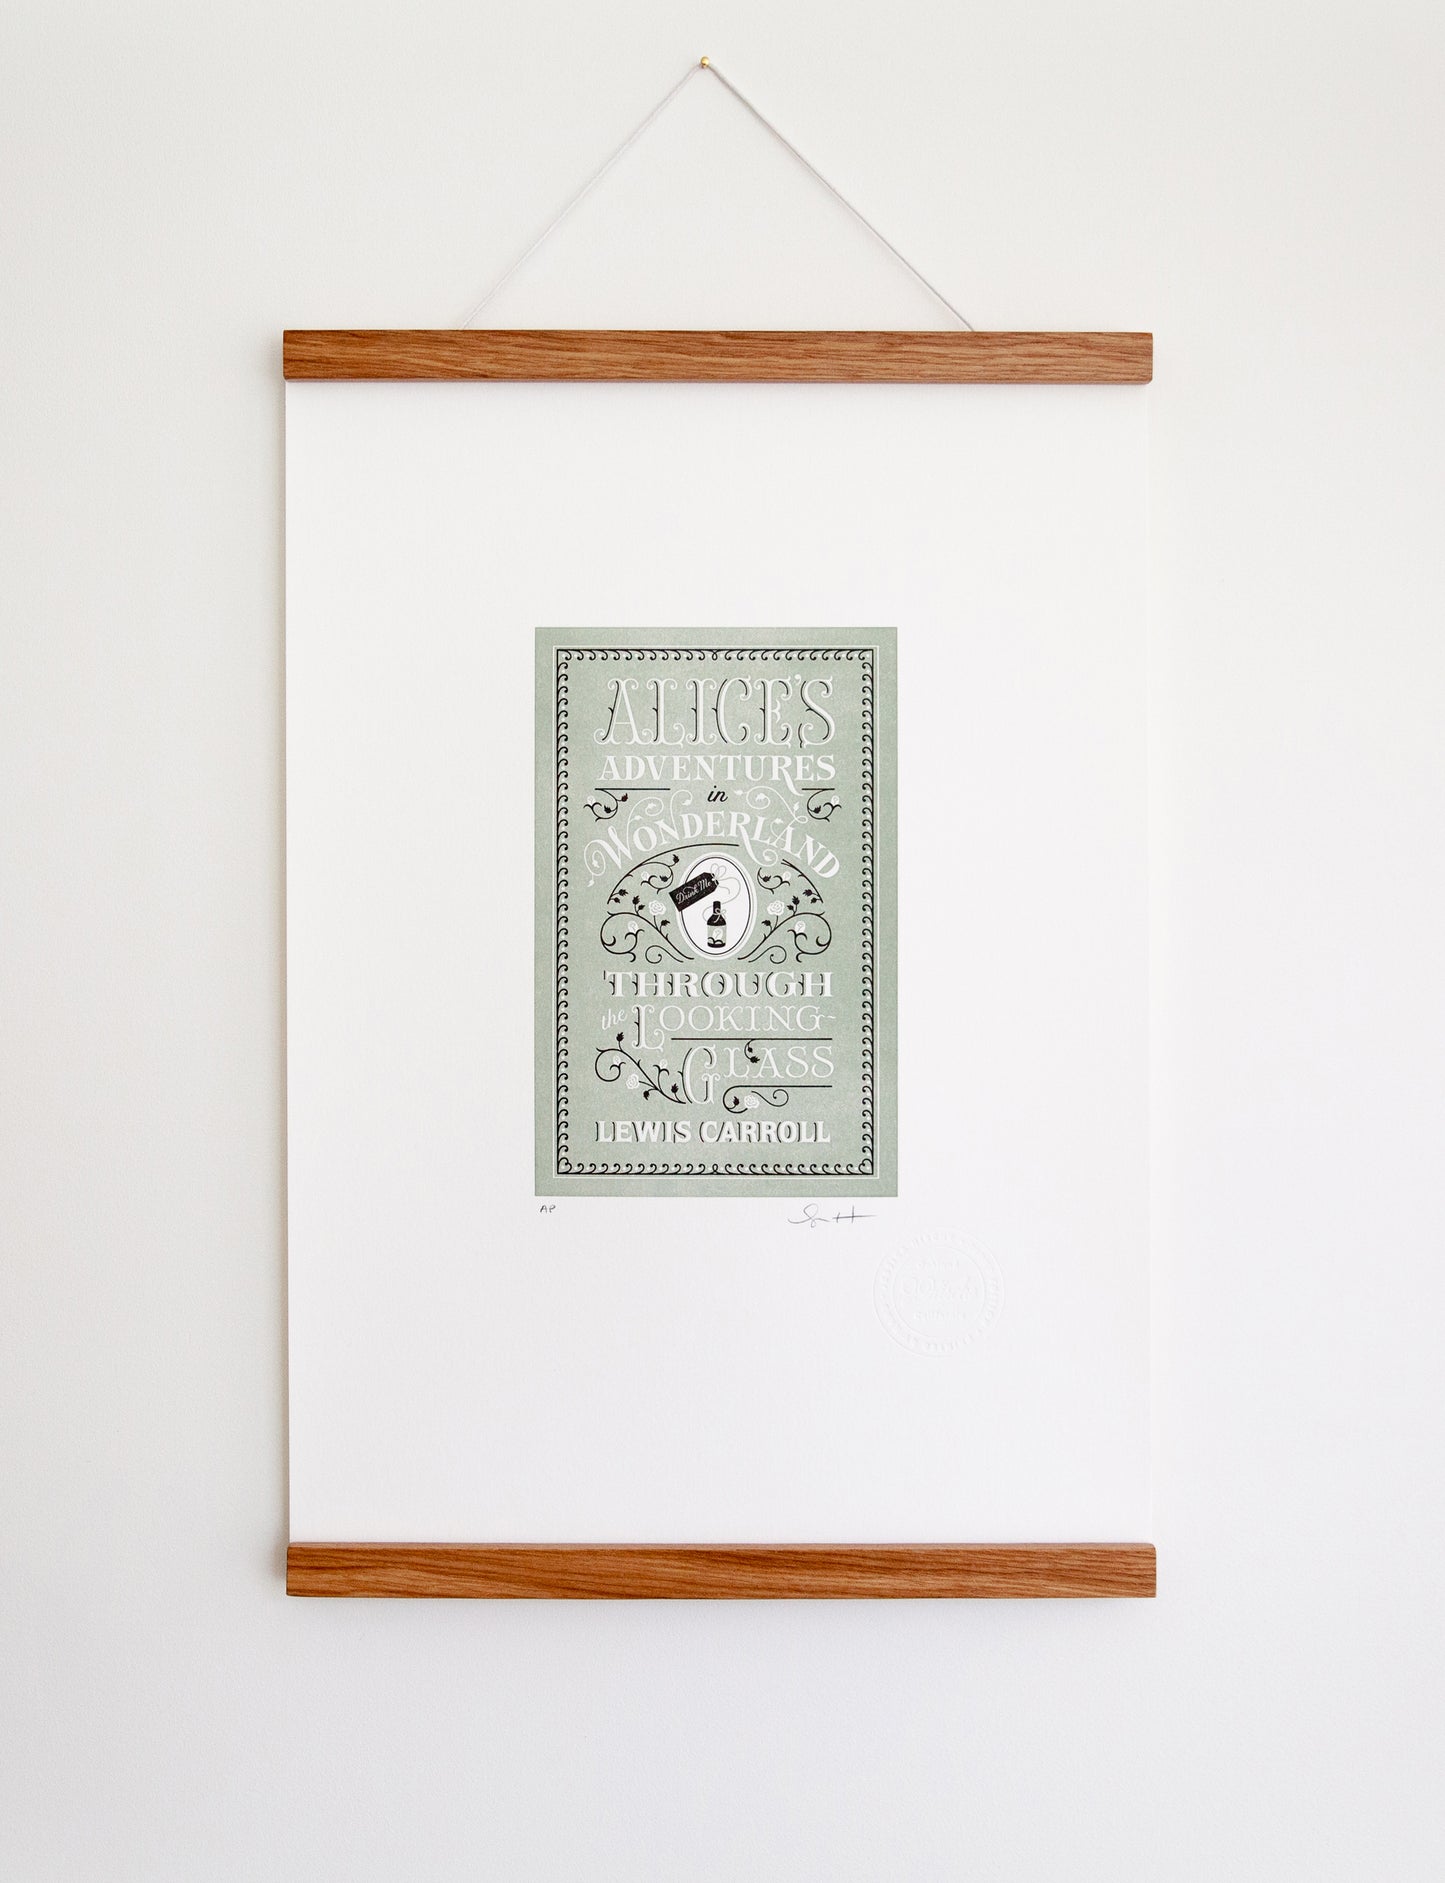 Framed 2-color letterpress print in green and black. Printed artwork is an illustrated book cover of Alice's Adventures in Wonderland including custom hand-lettering.